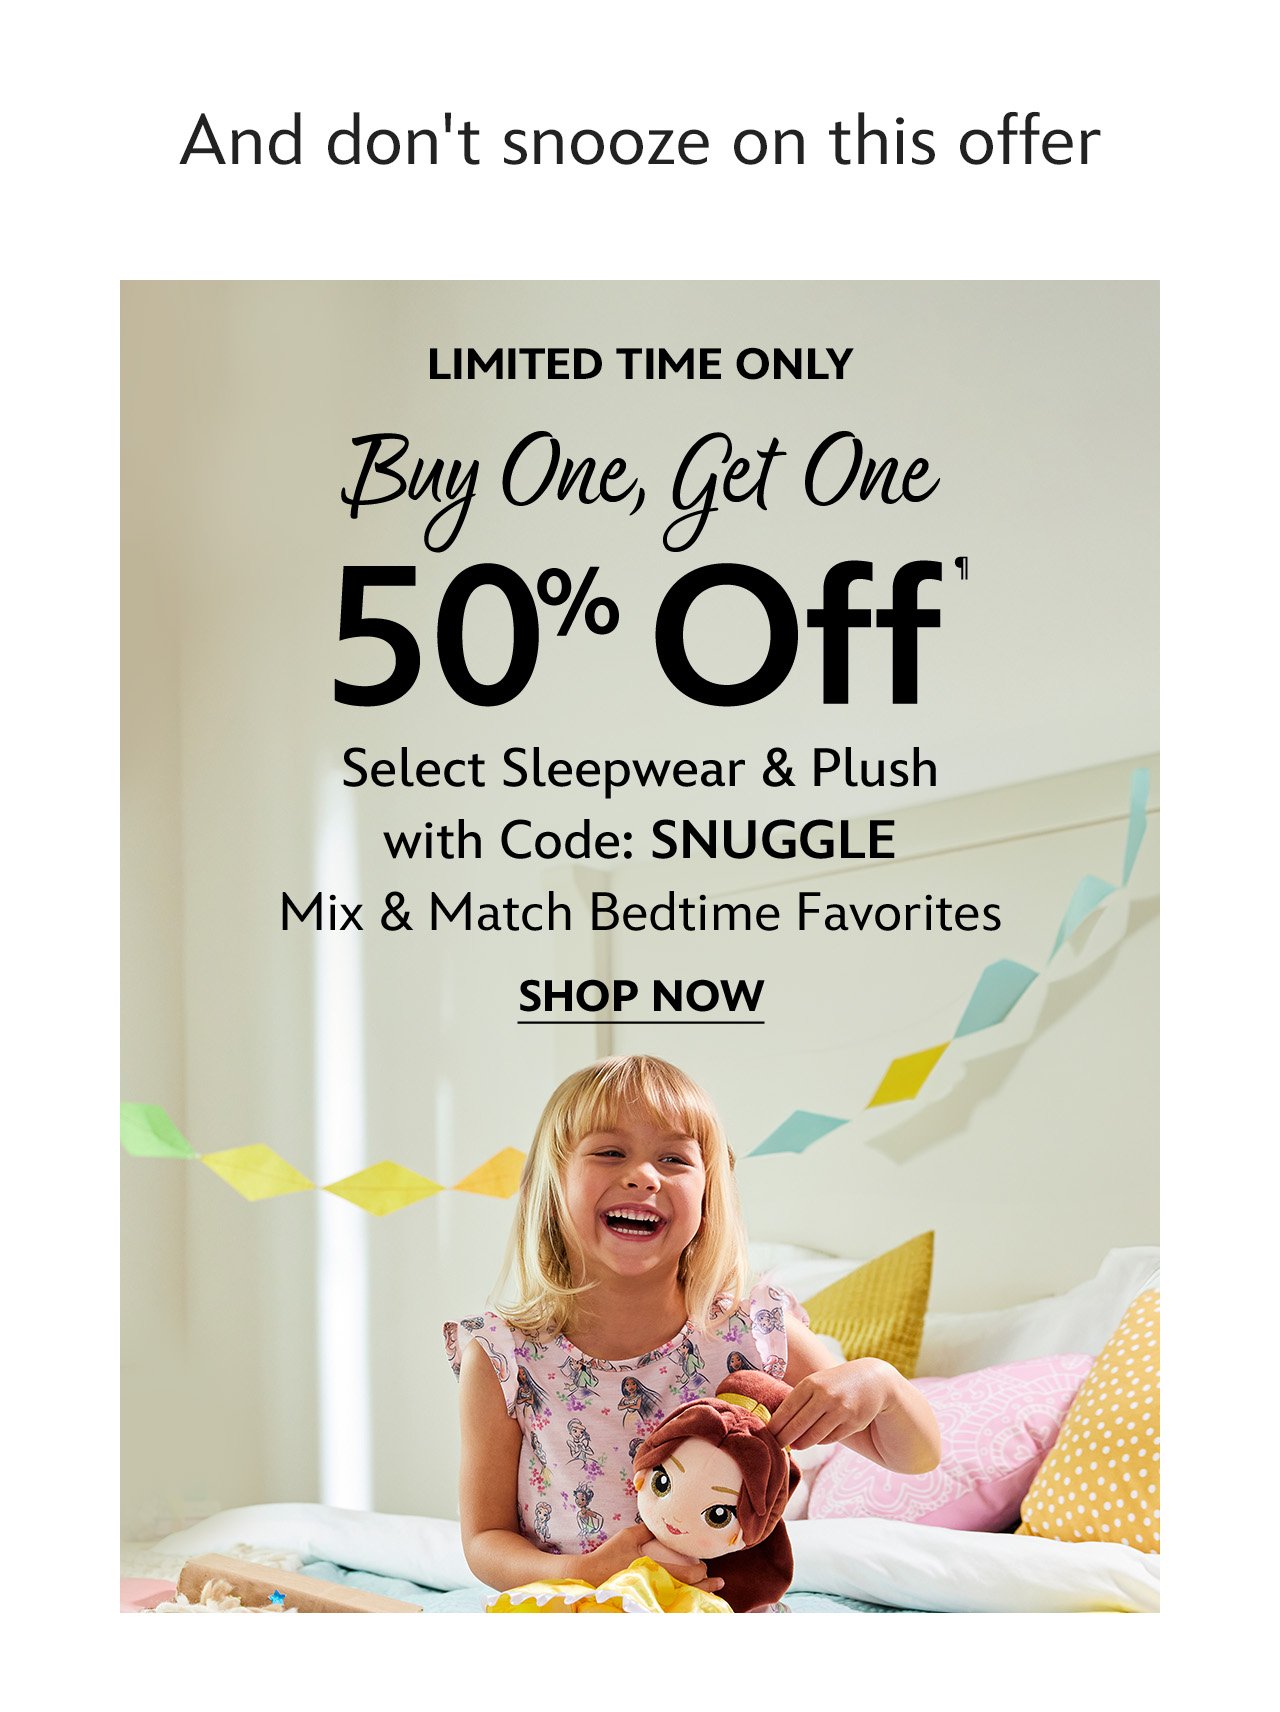 And don't snooze on this offer | Limited Time Only - Buy One, Get One 50% Off Select Sleepwear & Plush with Code: SNUGGLE - Mix & Match Bedtime Favorites | Shop Now